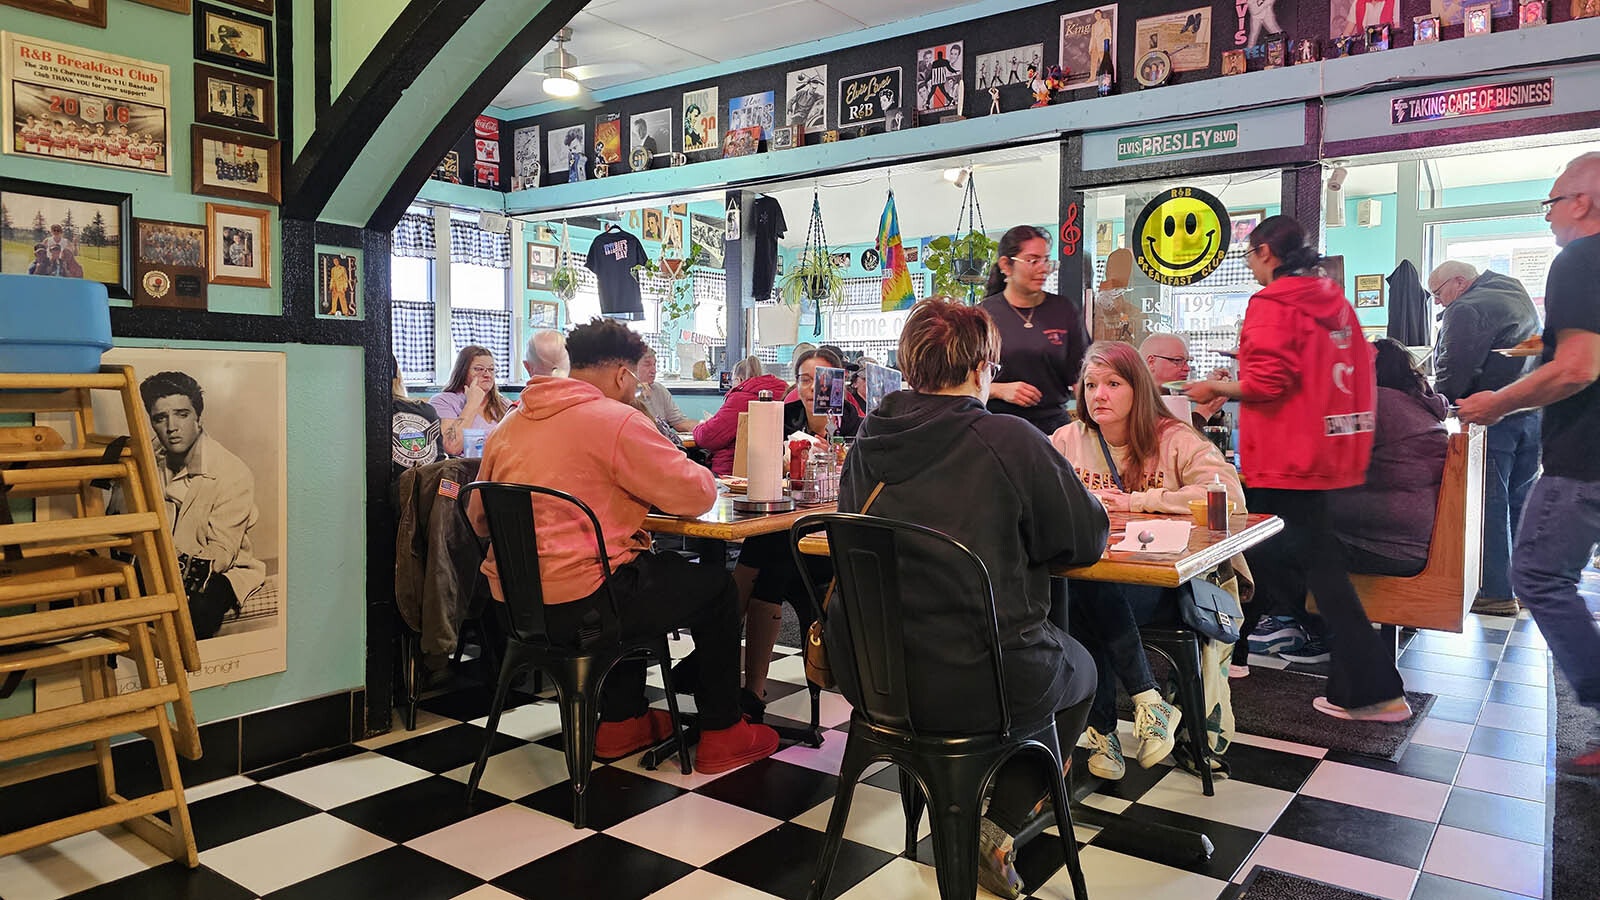 Weekends are packed at the R&B Breakfast Club on Lincolnway in Cheyenne, where it's always 1957 and Elvis rules.